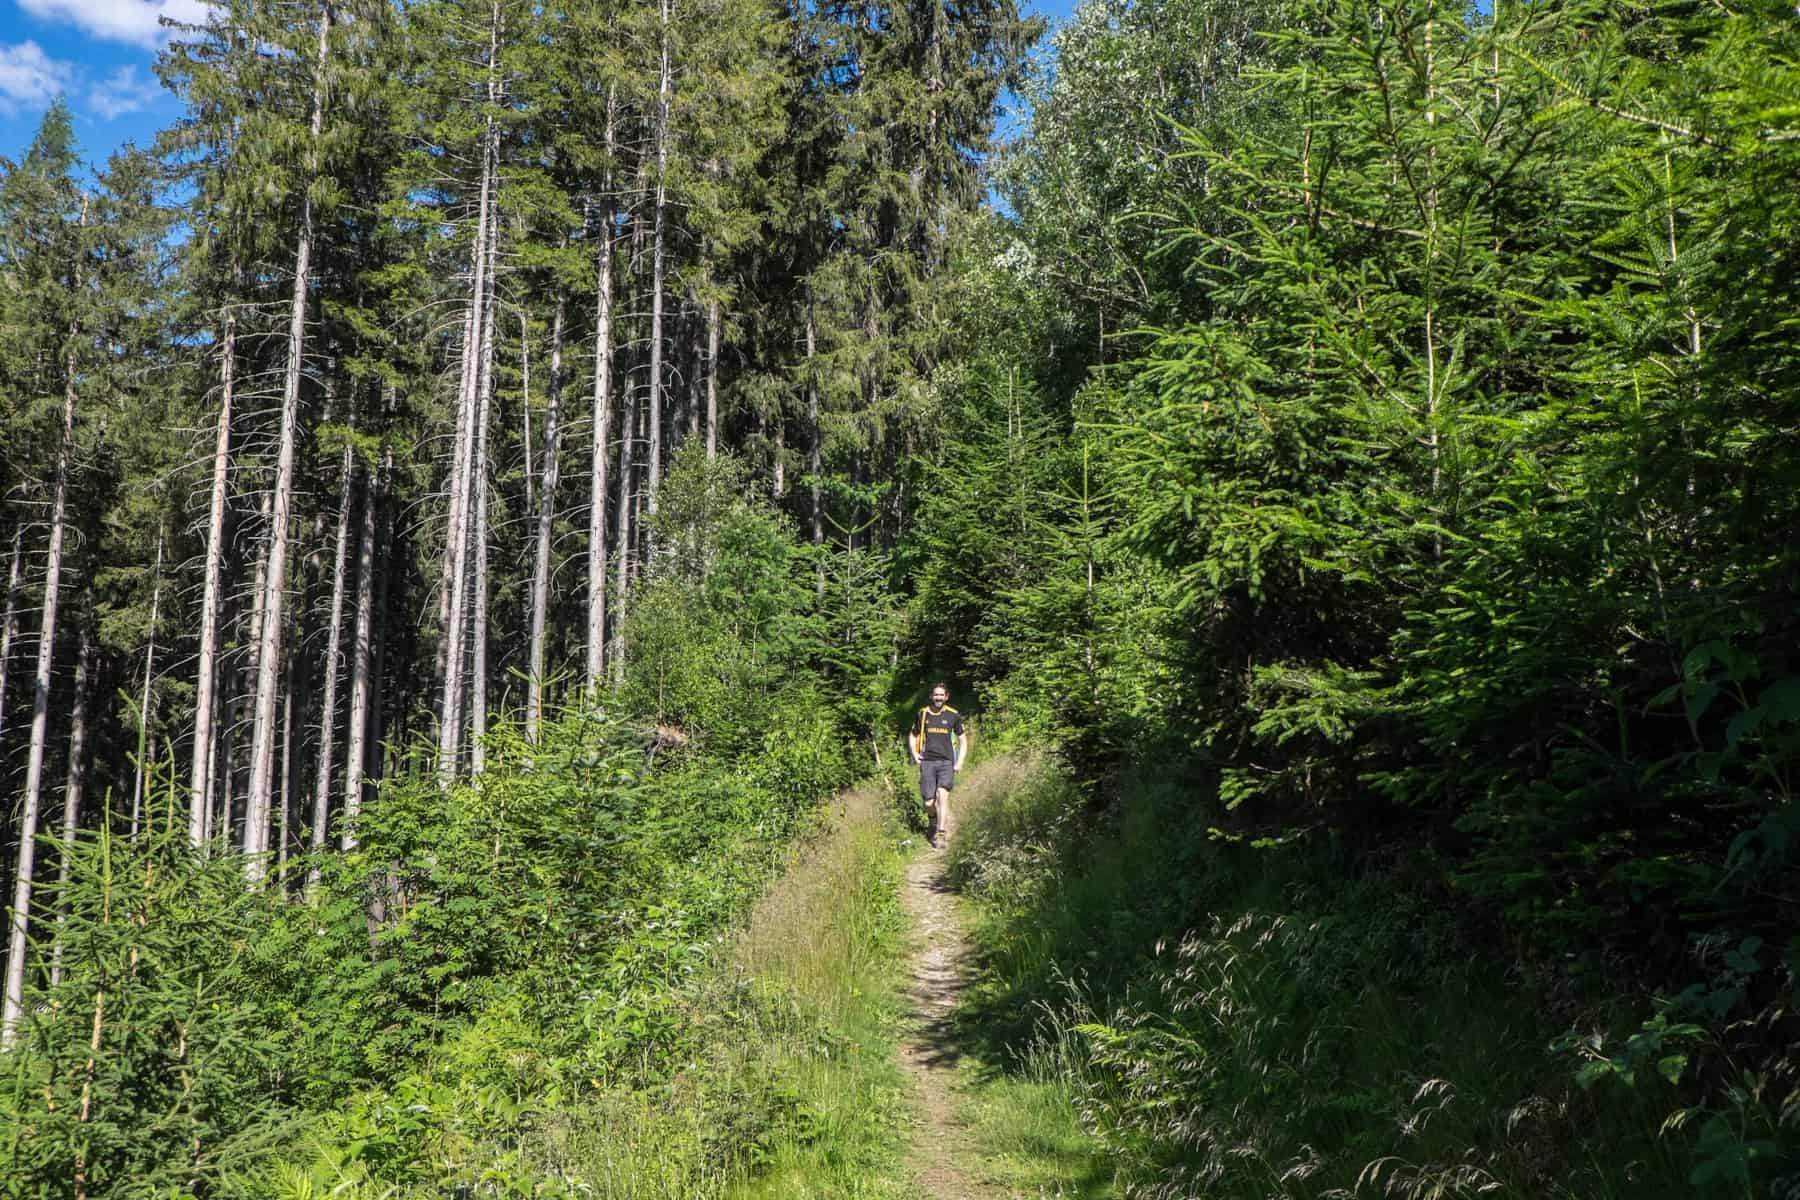 A man in dark shorts and t-shirt hiking out of a dense forest with tall, skinny trees on the Hochgründeck Mountain in Austria